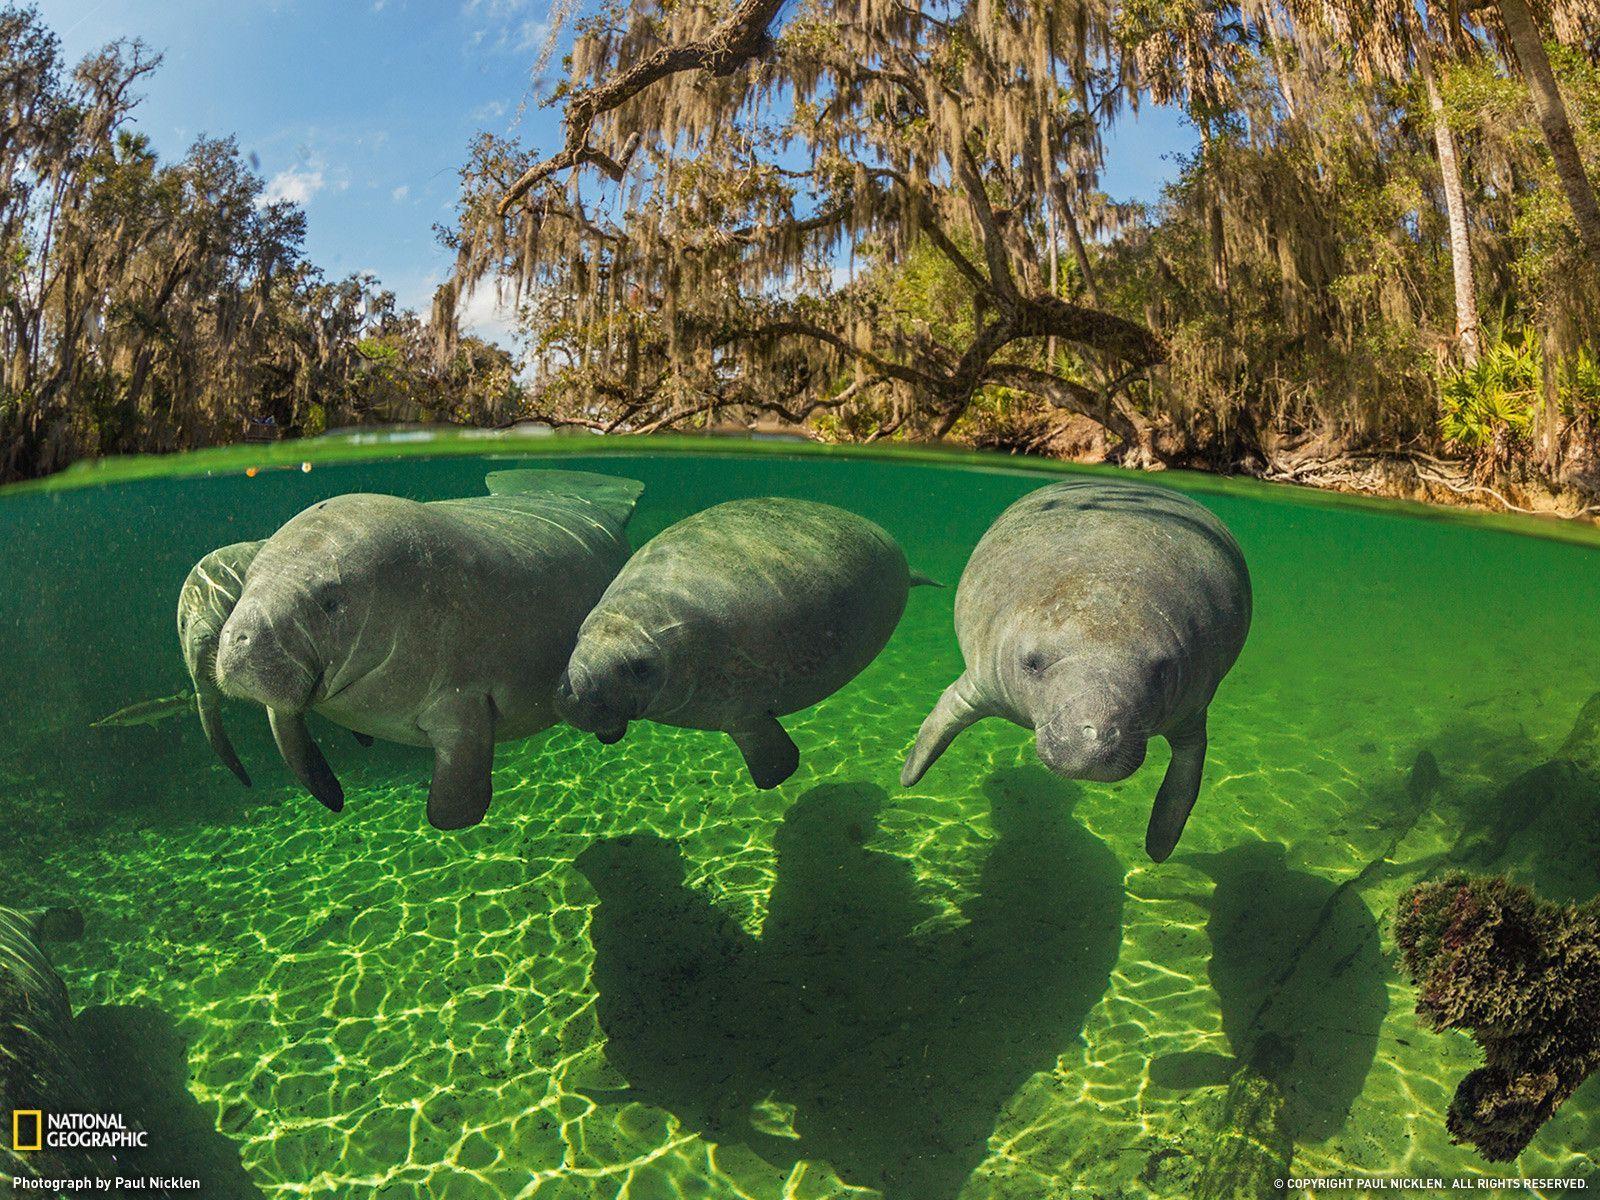 Manatee Picture - Underwater Wallpaper - National Geographic